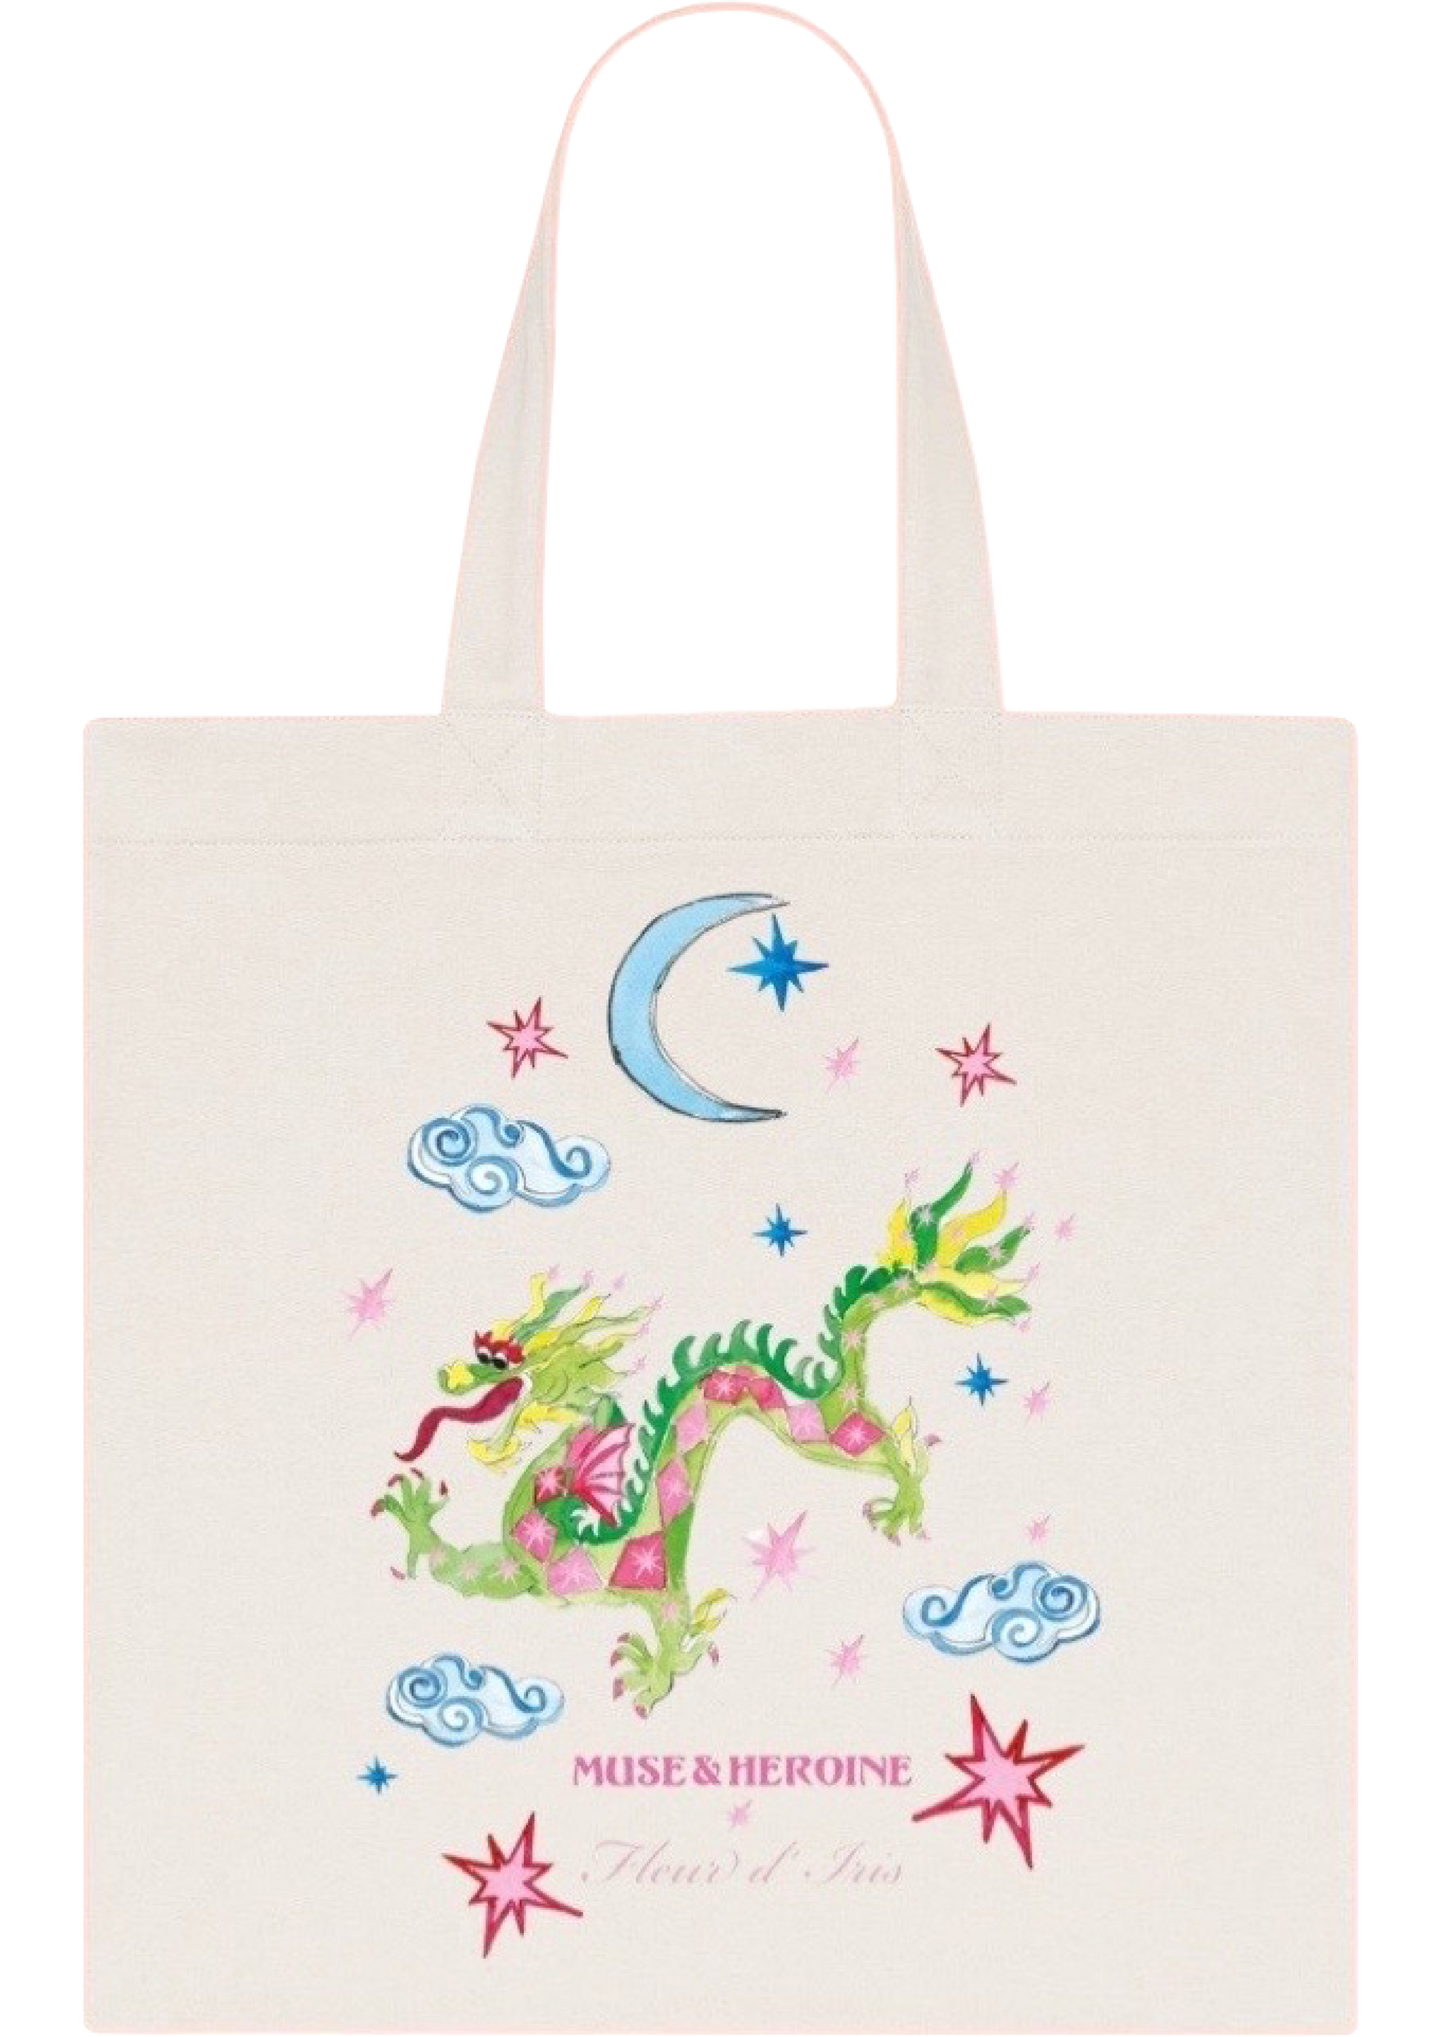 THE MUSE & HEROINE DRAGON TOTE BAG - LIMITED EDITION BY FLEUR D'IRIS